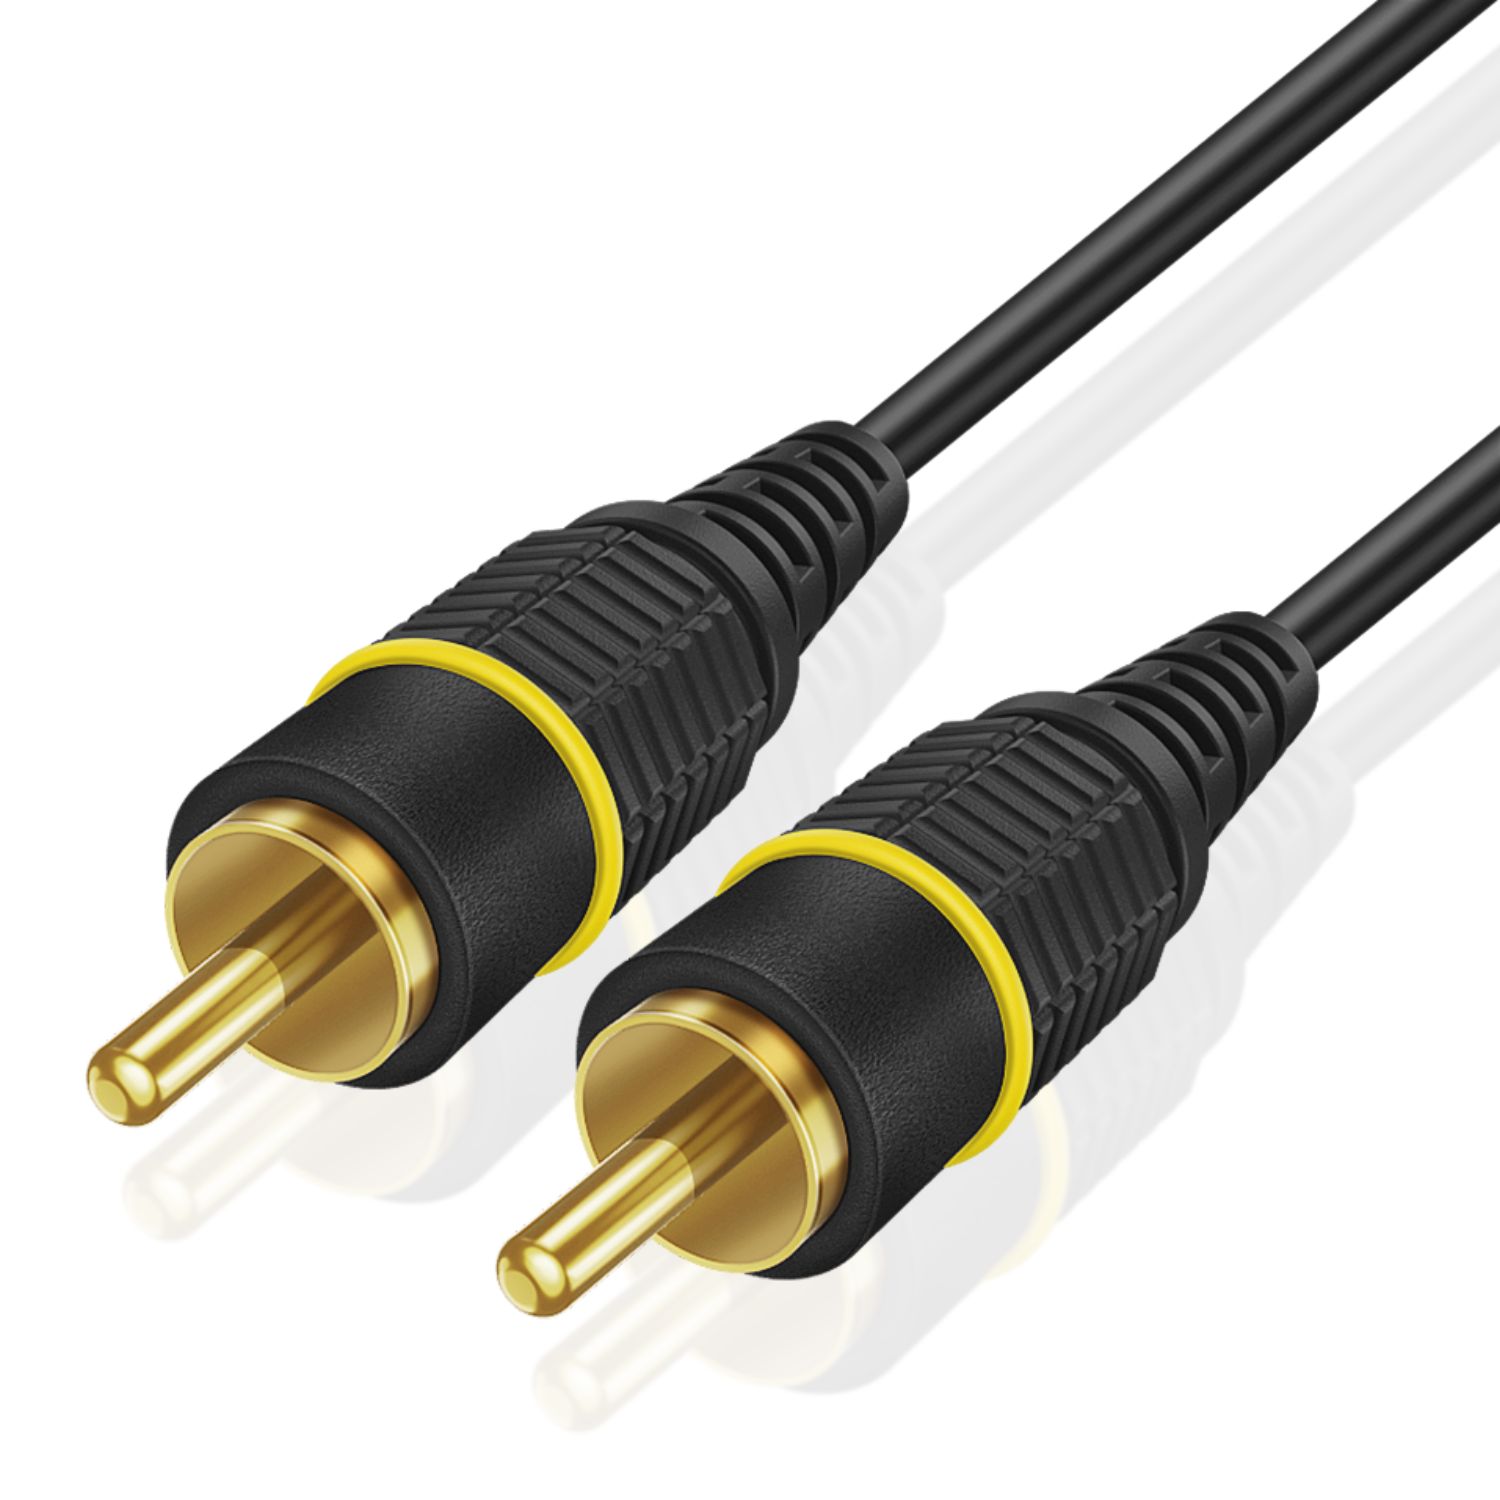 Subwoofer S/PDIF Audio Digital Coaxial RCA Composite Video Cable (3 Feet) - Gold Plated Dual Shielded RCA to RCA Male Connectors - Black - image 1 of 6